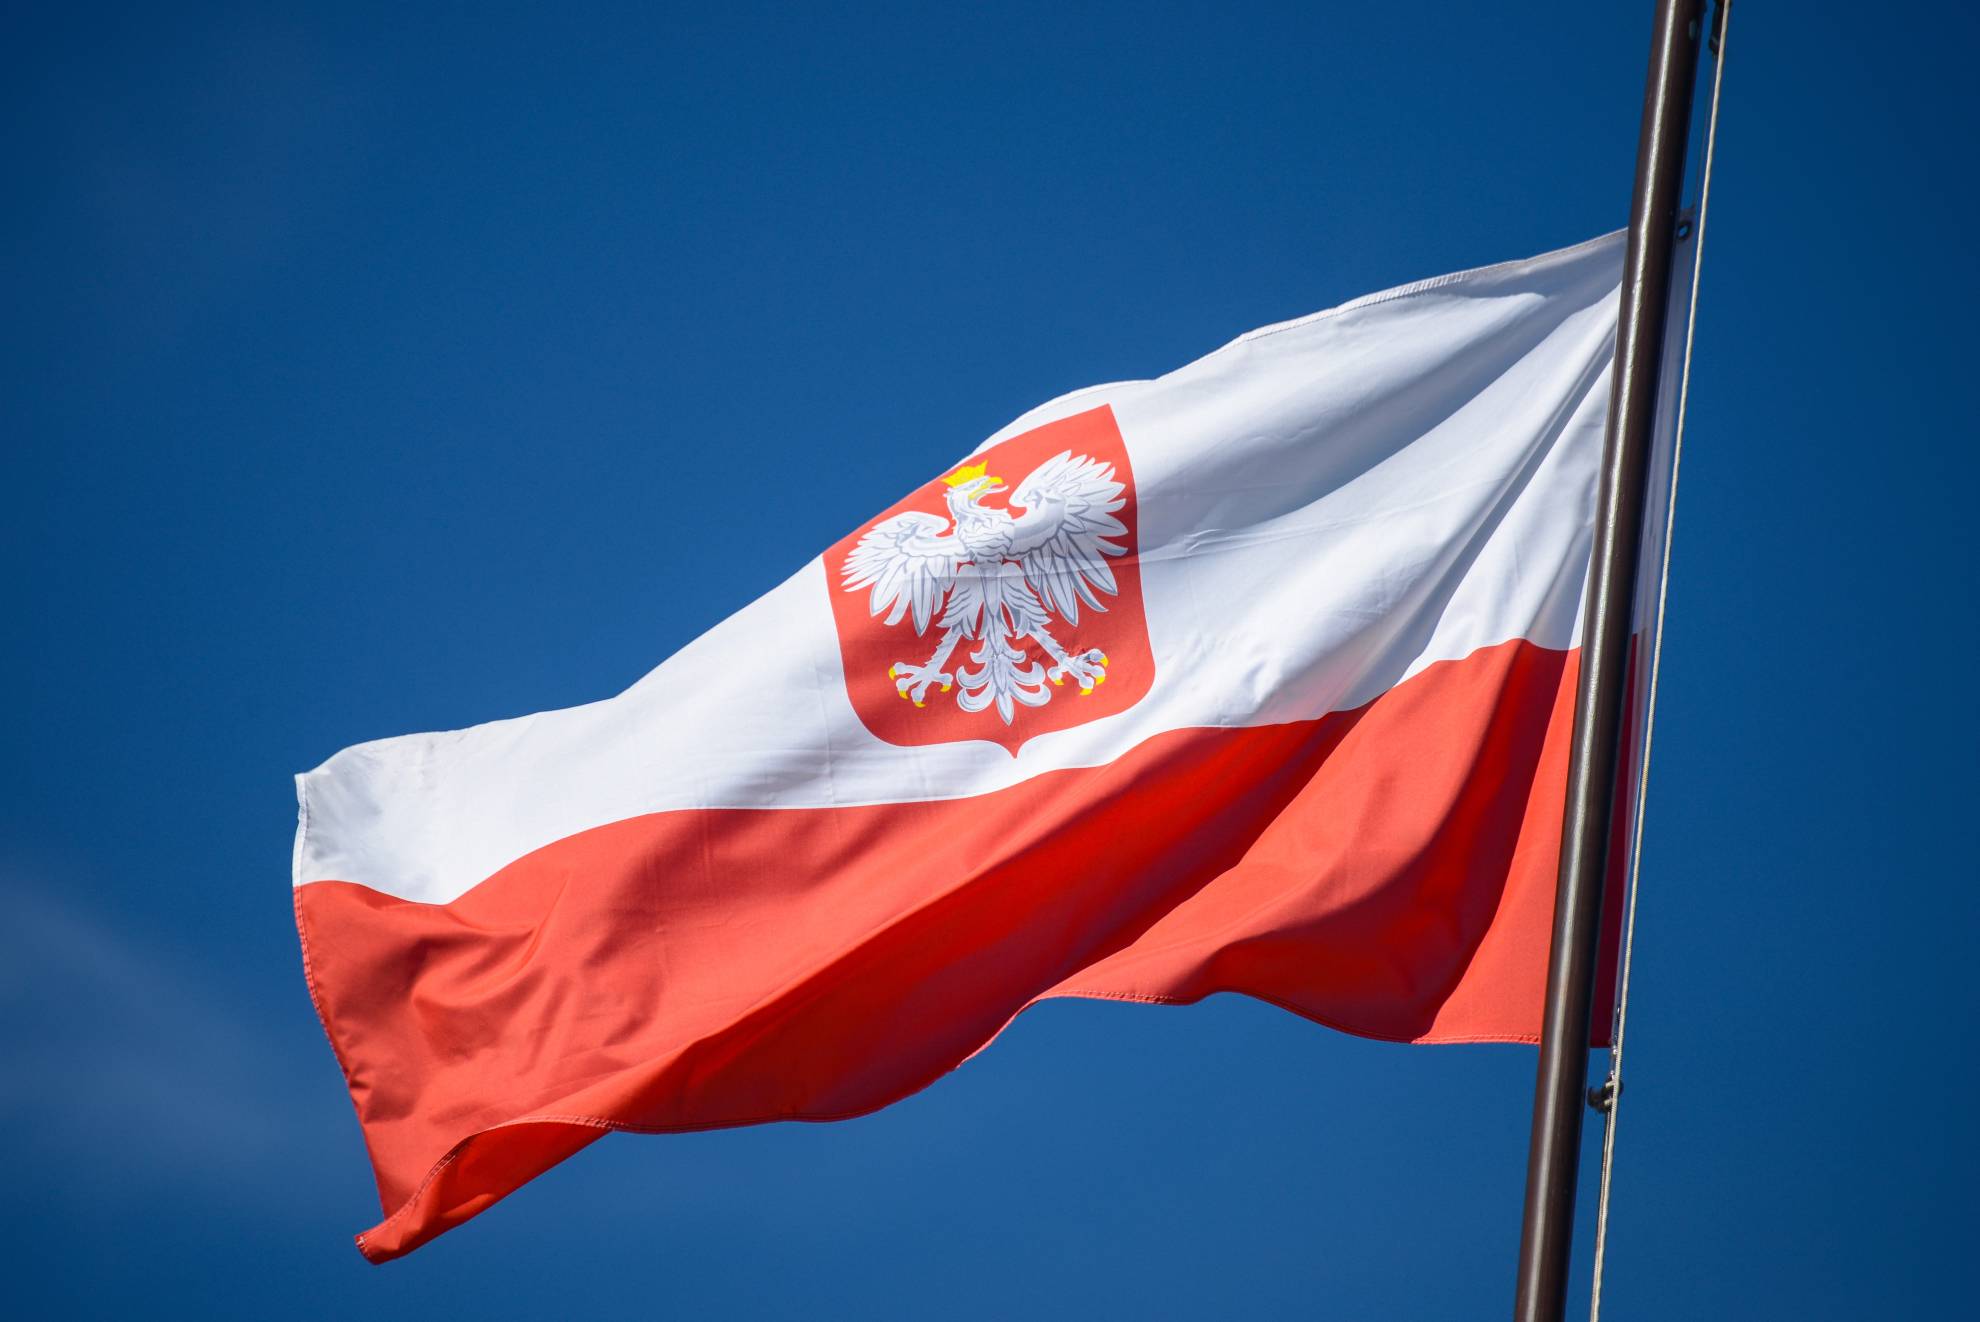 the-state-flag-of-poland-with-the-emblem-of-the-re-2021-11-09-20-04-23-utc (1)